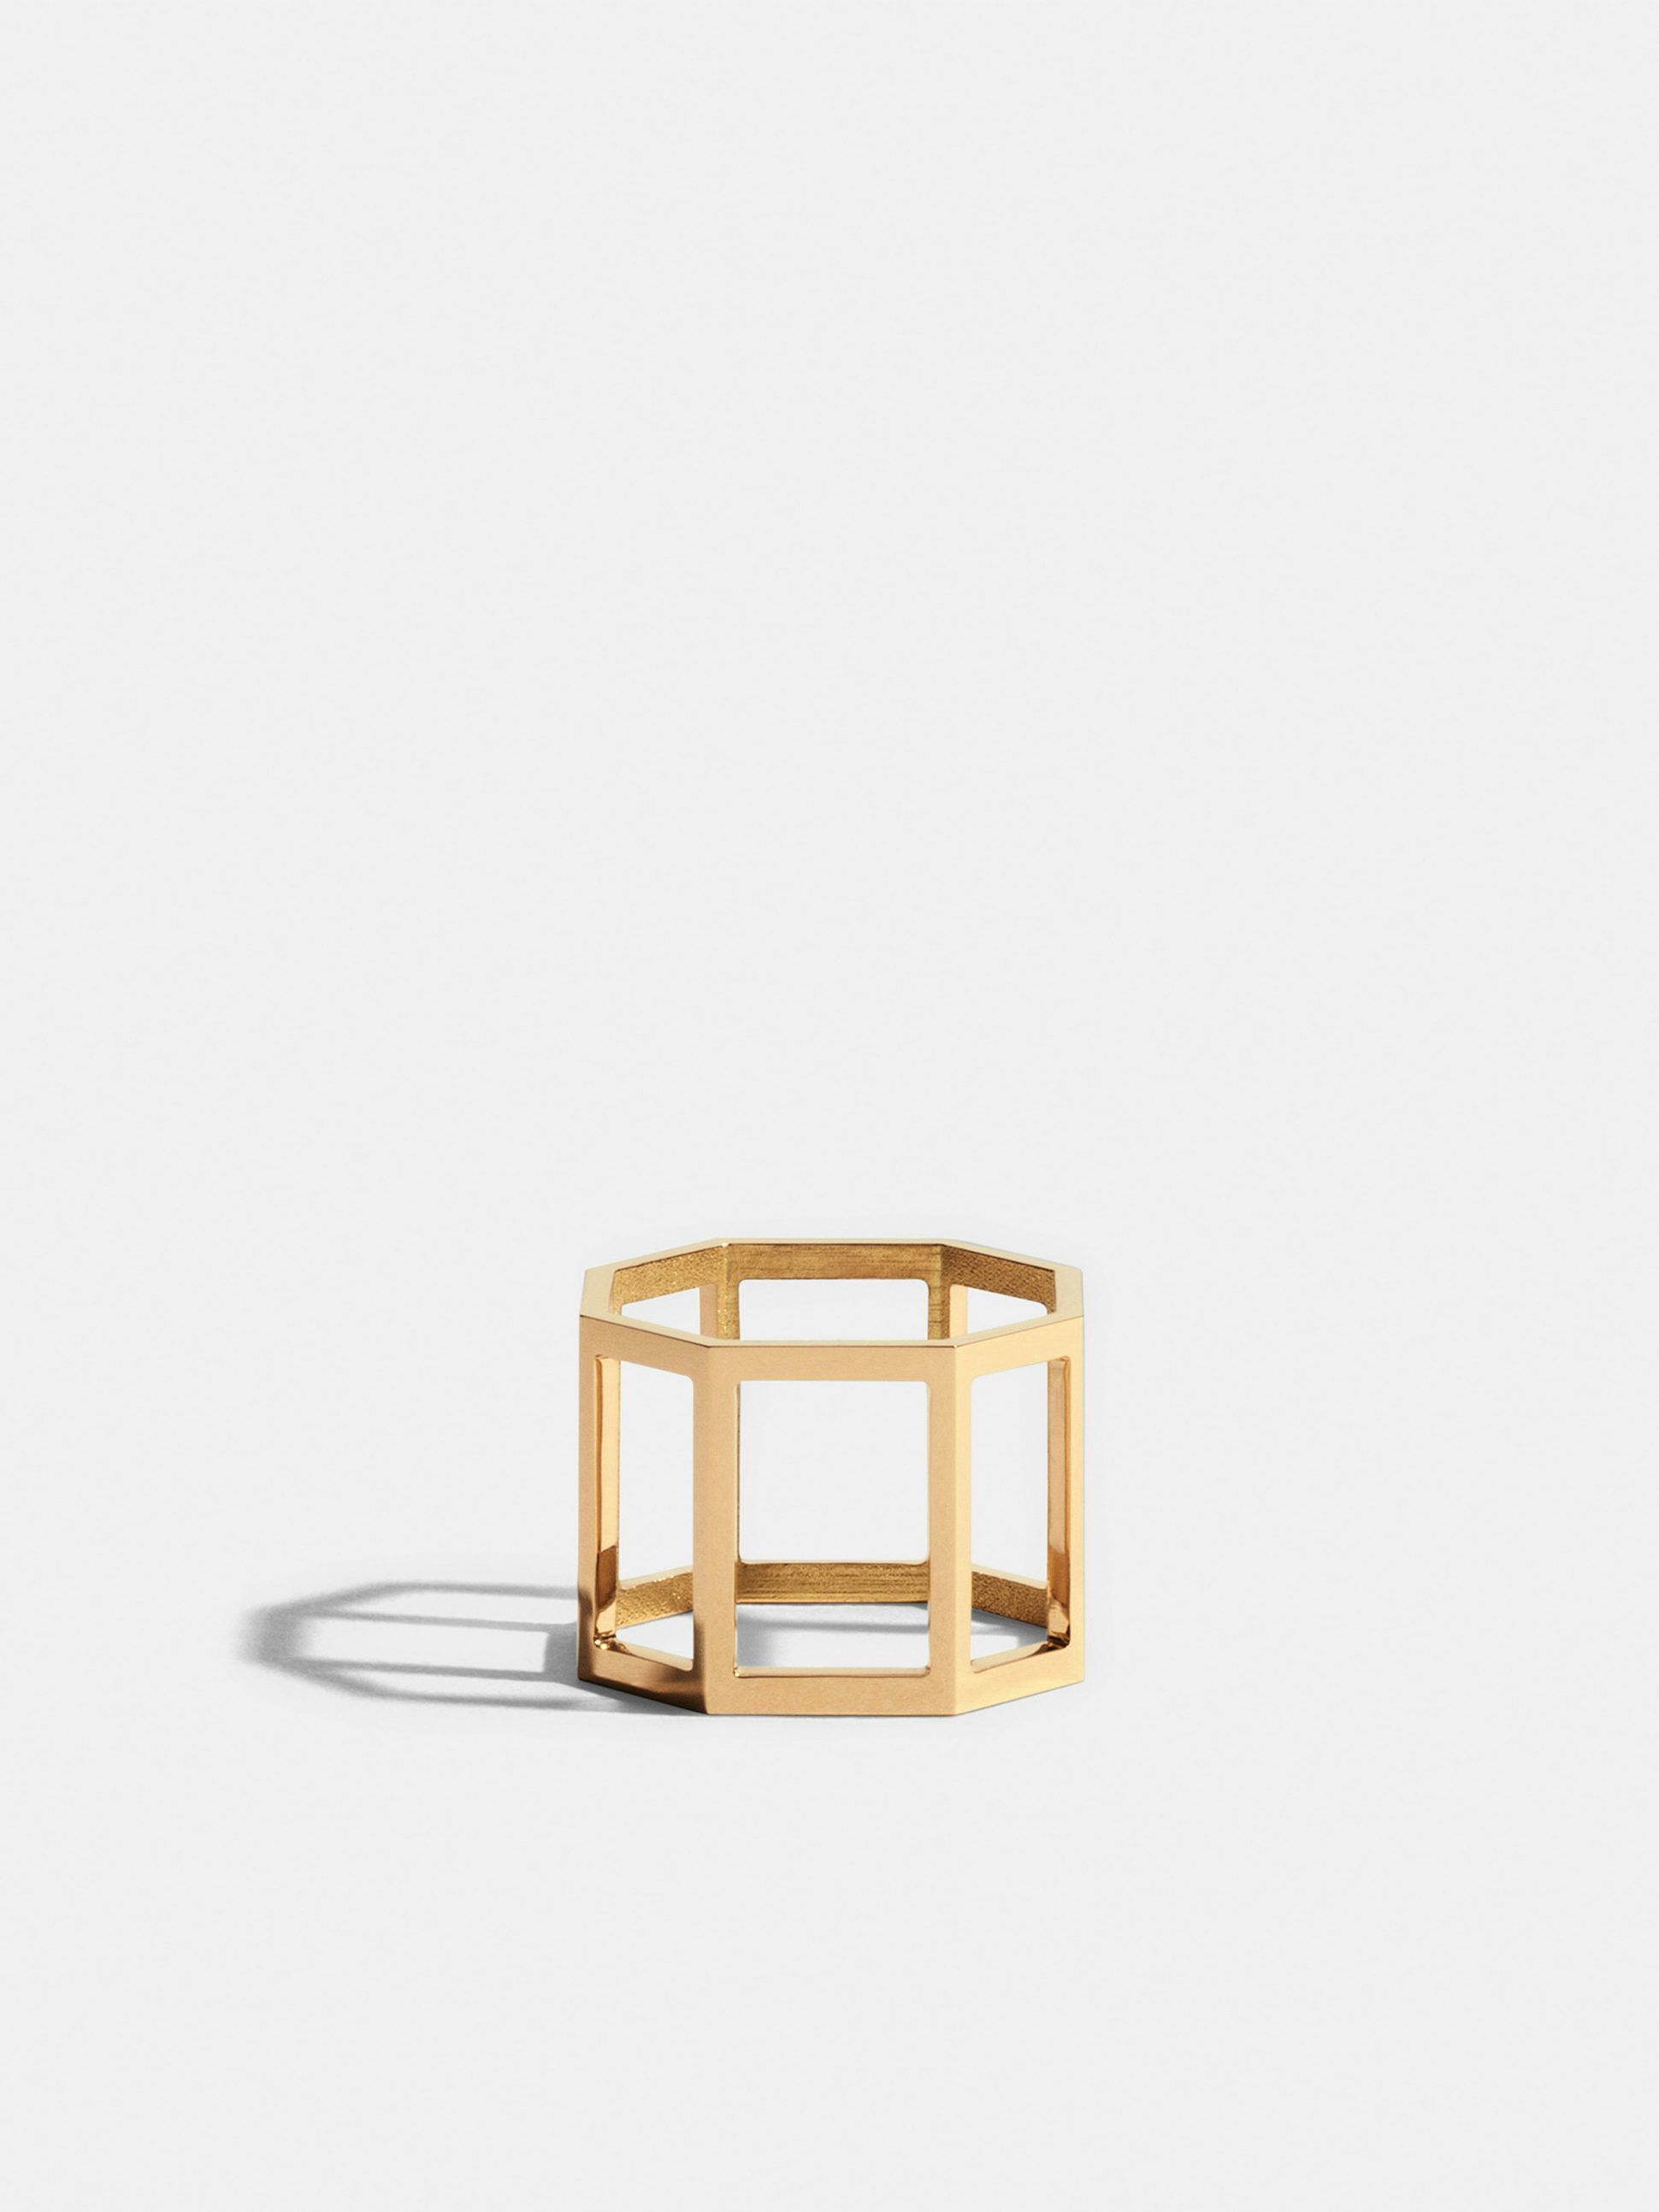 Octogone structured ring in 18k Fairmined ethical yellow gold (14mm)